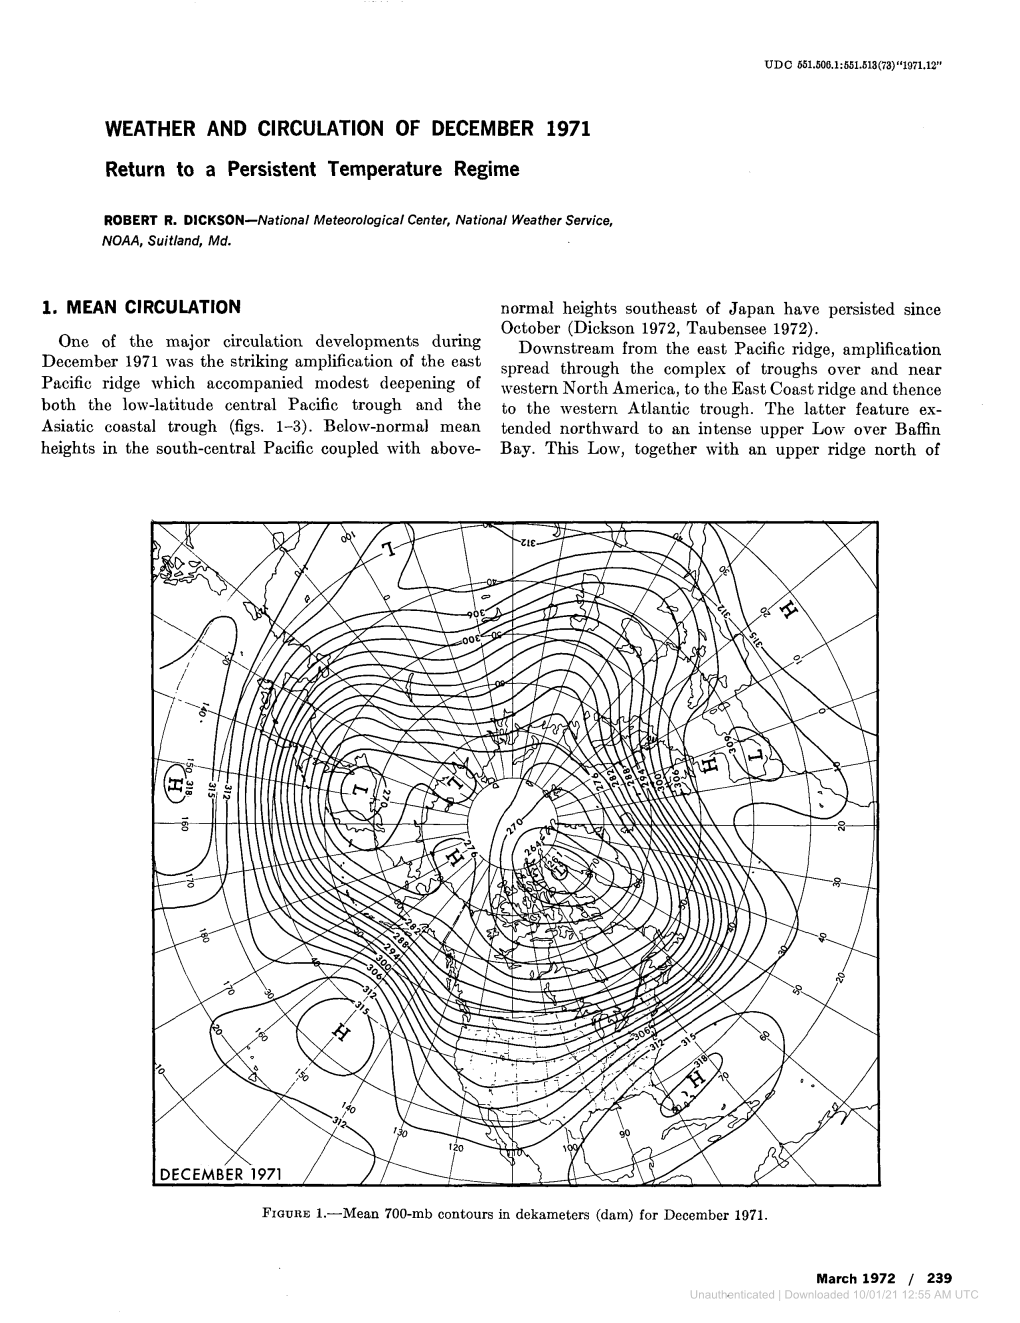 WEATHER and CIRCULATION of DECEMBER 1971 Return to a Persistent Temperature Regime